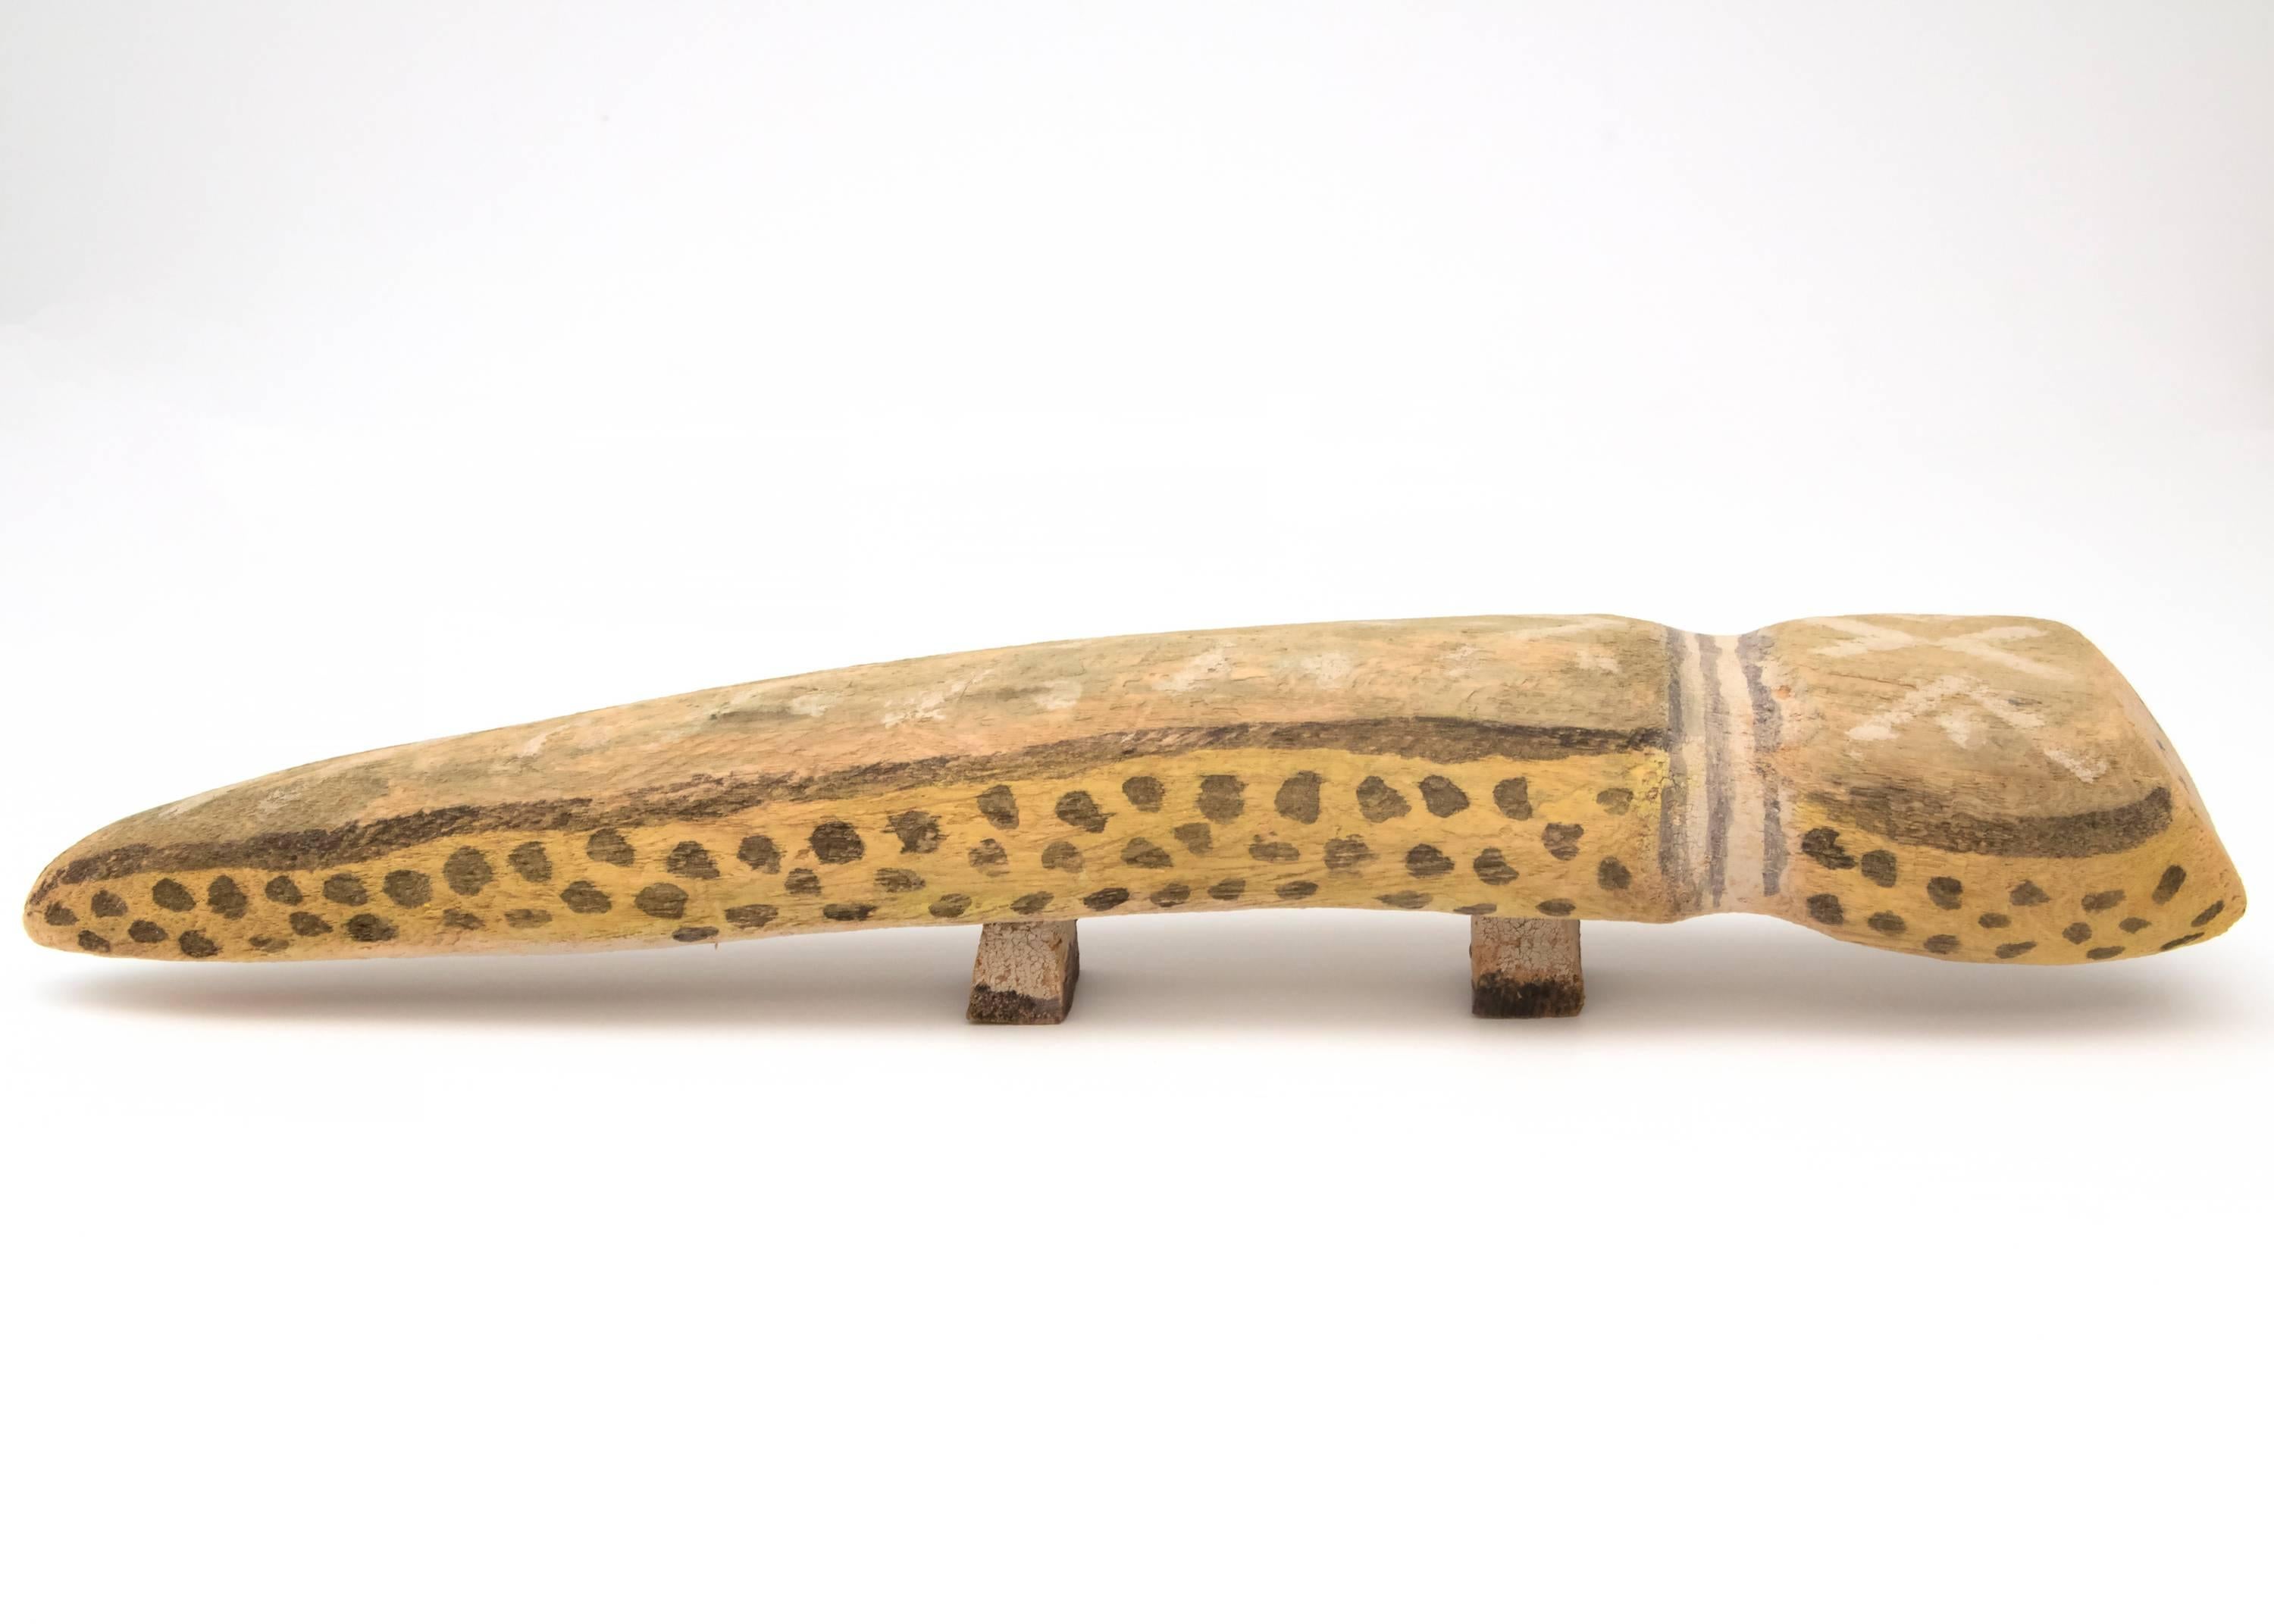 A lizard form carved of cottonwood with pigments.

About the Artist:
A Navajo Sheepherder and medicine man, Charlie Willeto began carving in 1960, just four years before his death. He is now one of the best recognized Navajo folk artists. The